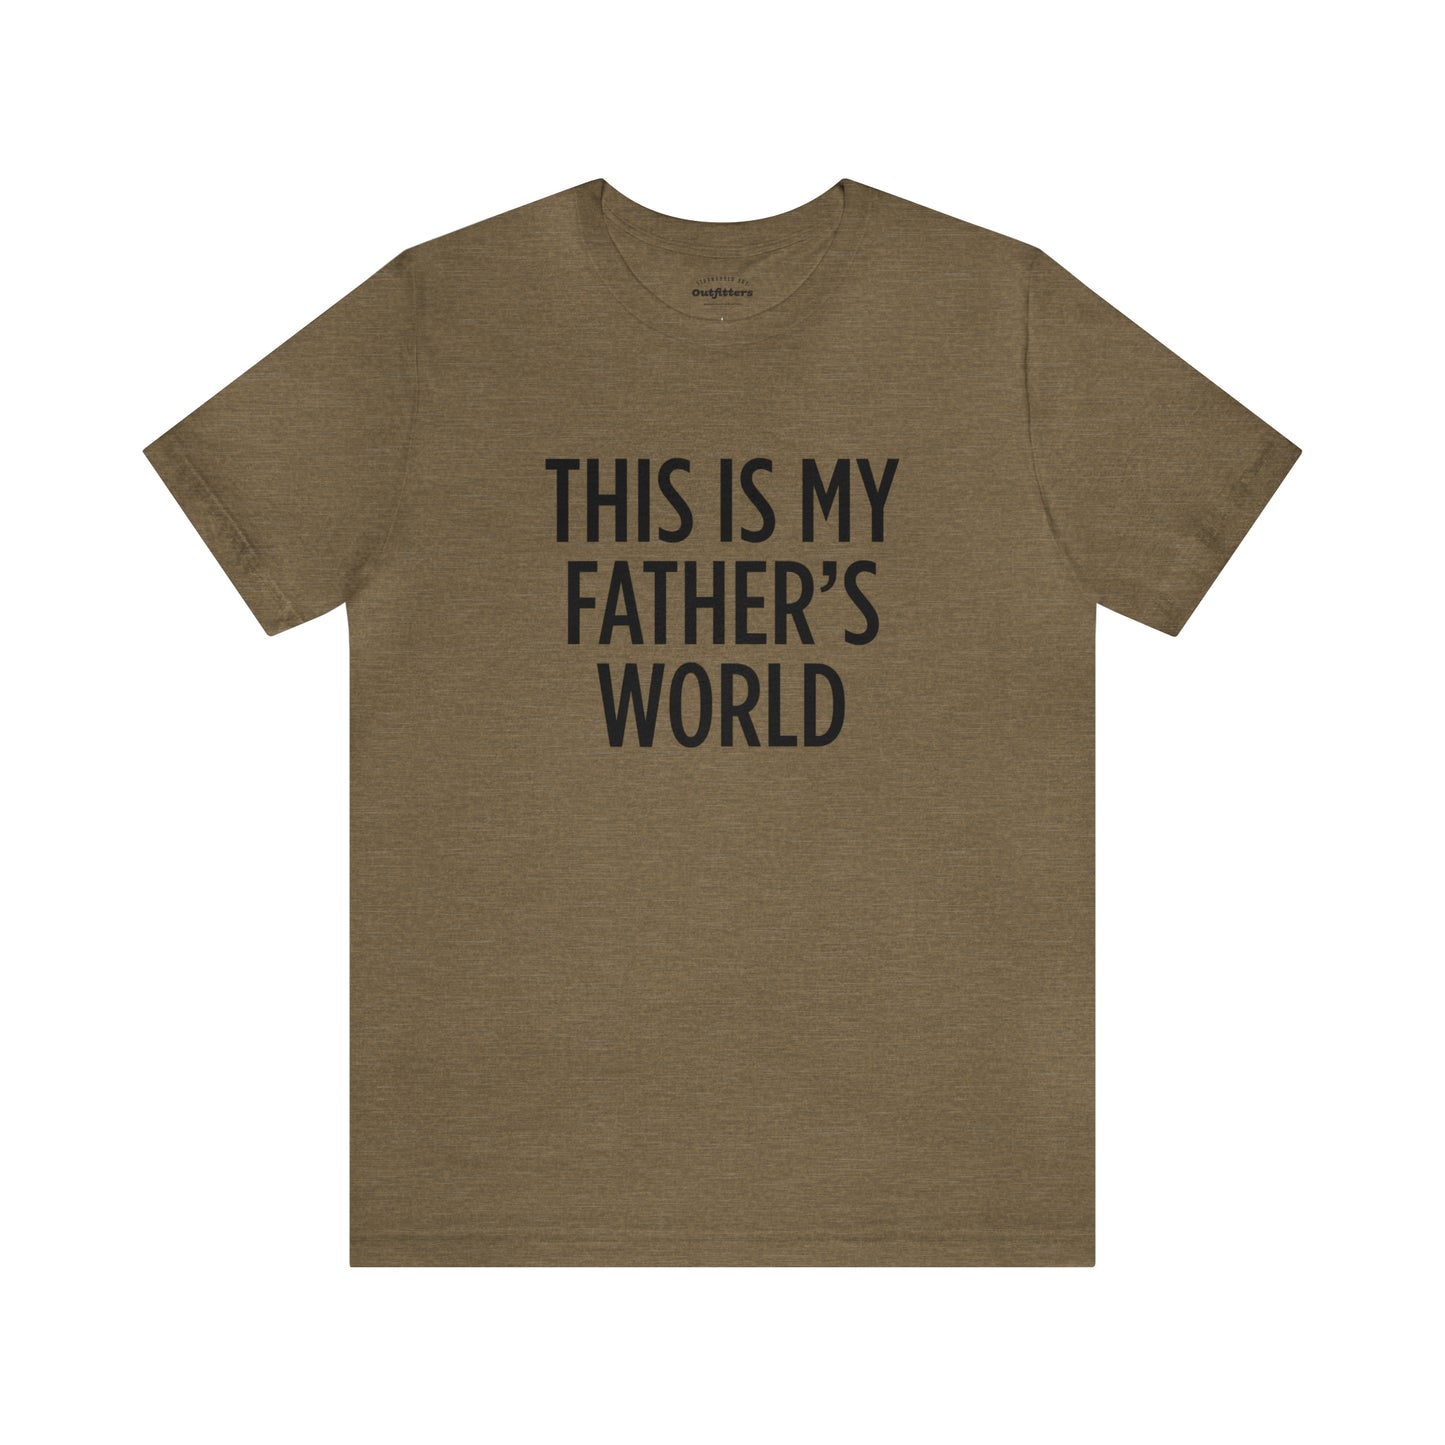 This is My Father's World T-shirt